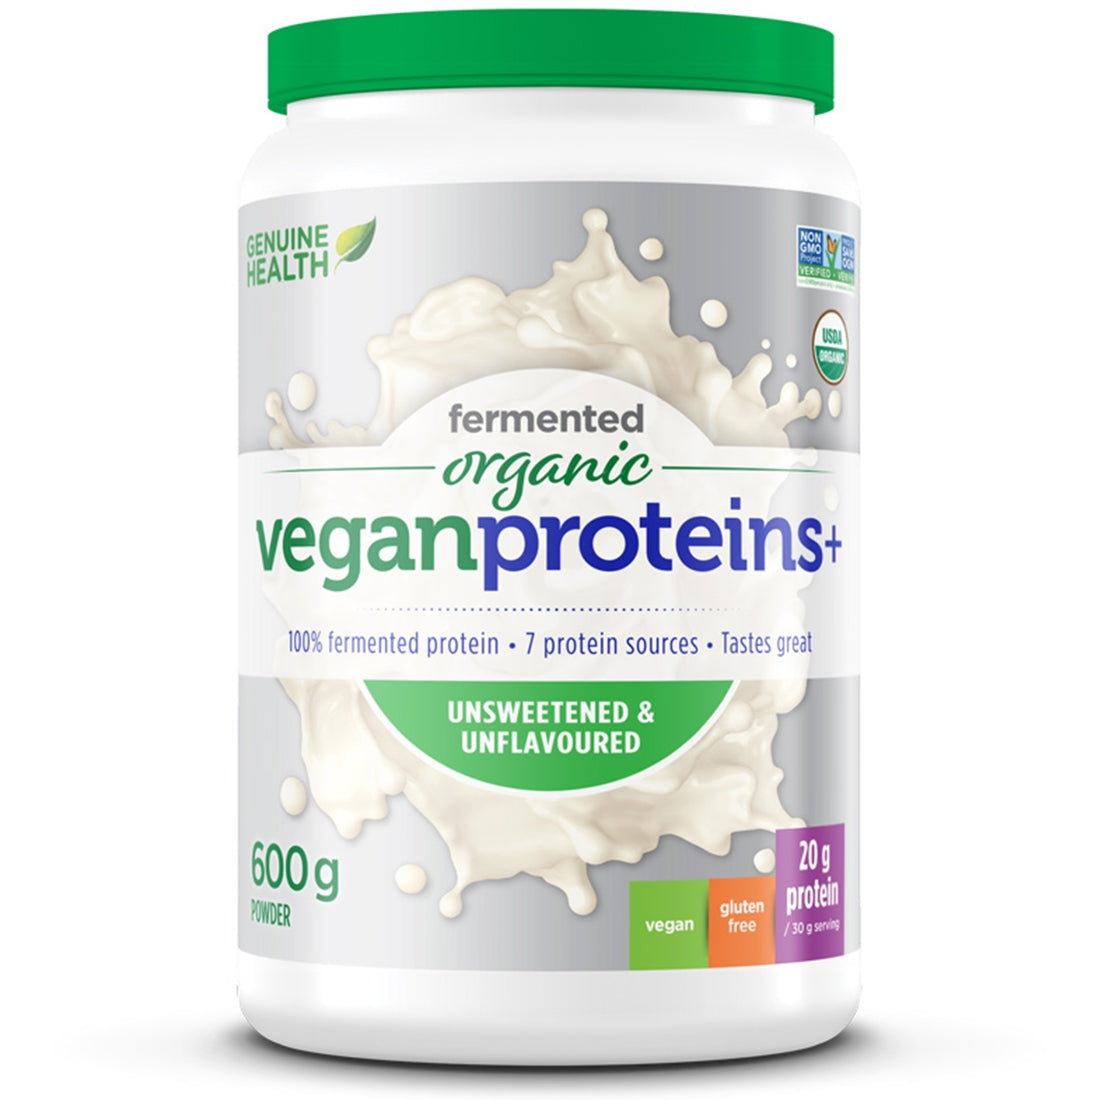 Unsweetened & Unflavoured 600g | Genuine Health Fermented Organic Vegan Proteins // unflavoured